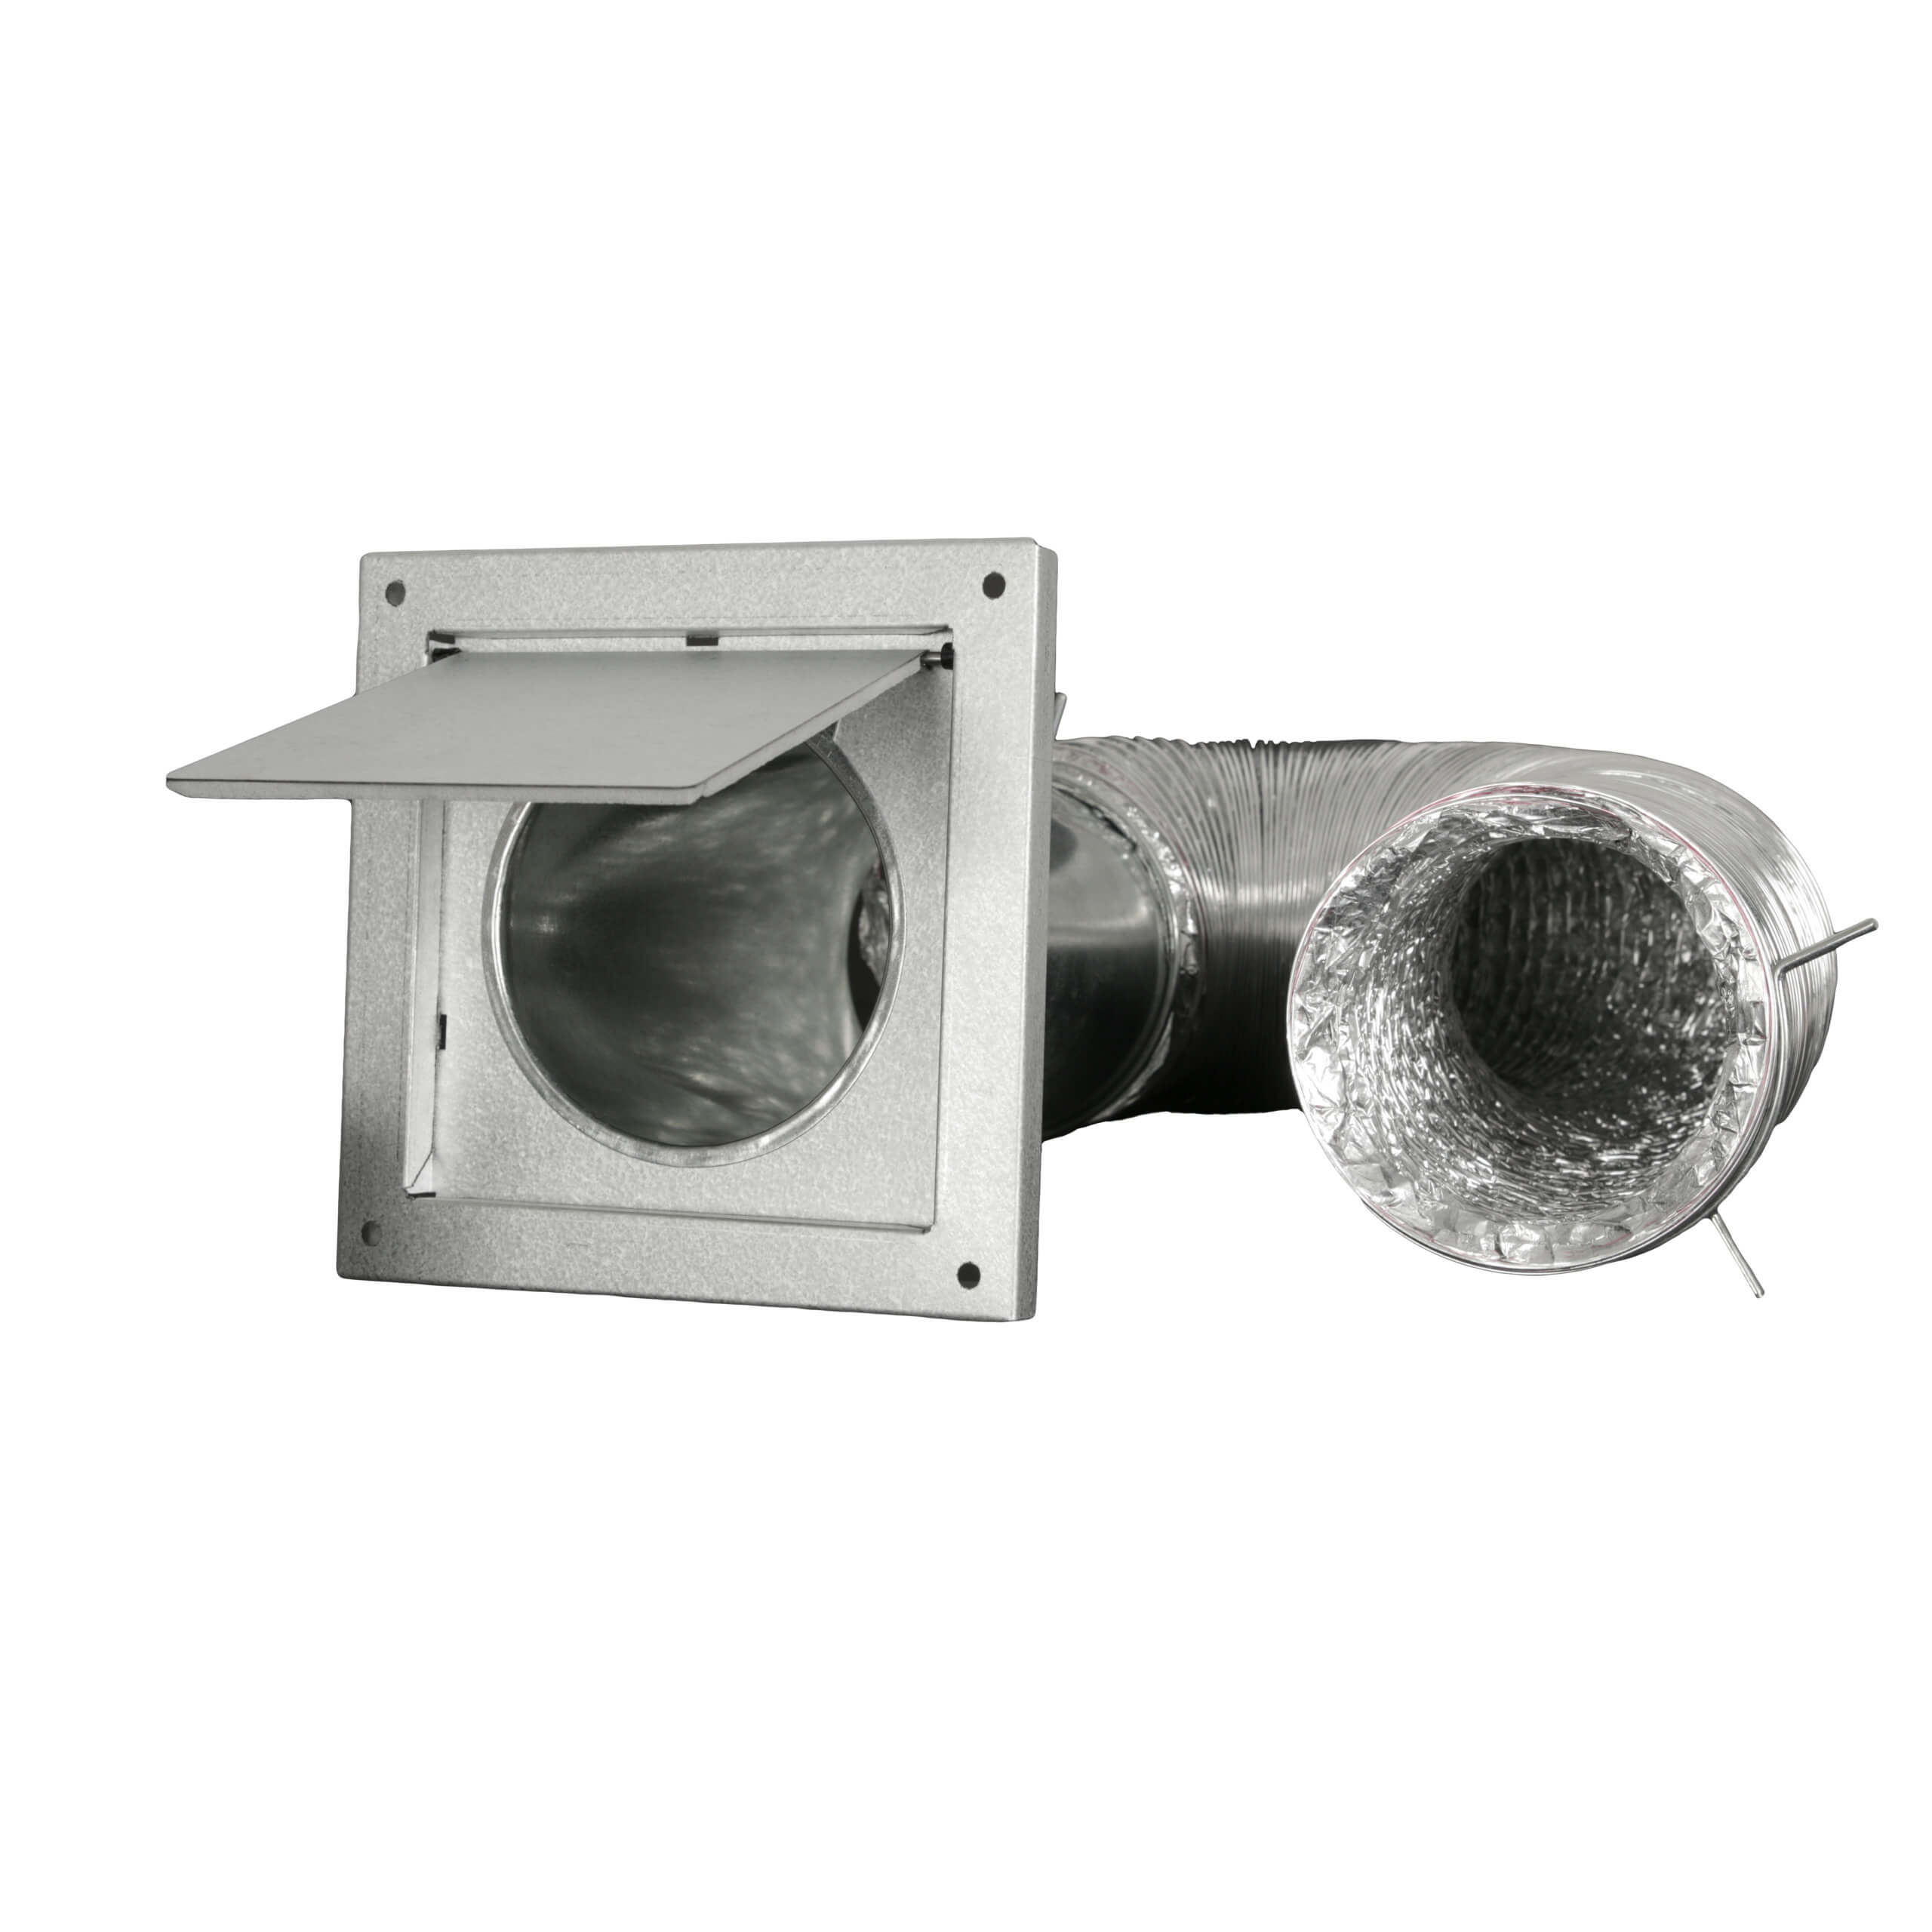 FAMCO Dryer Vent Kit with Flush Mount Metal Wall Vent - 4" Duct